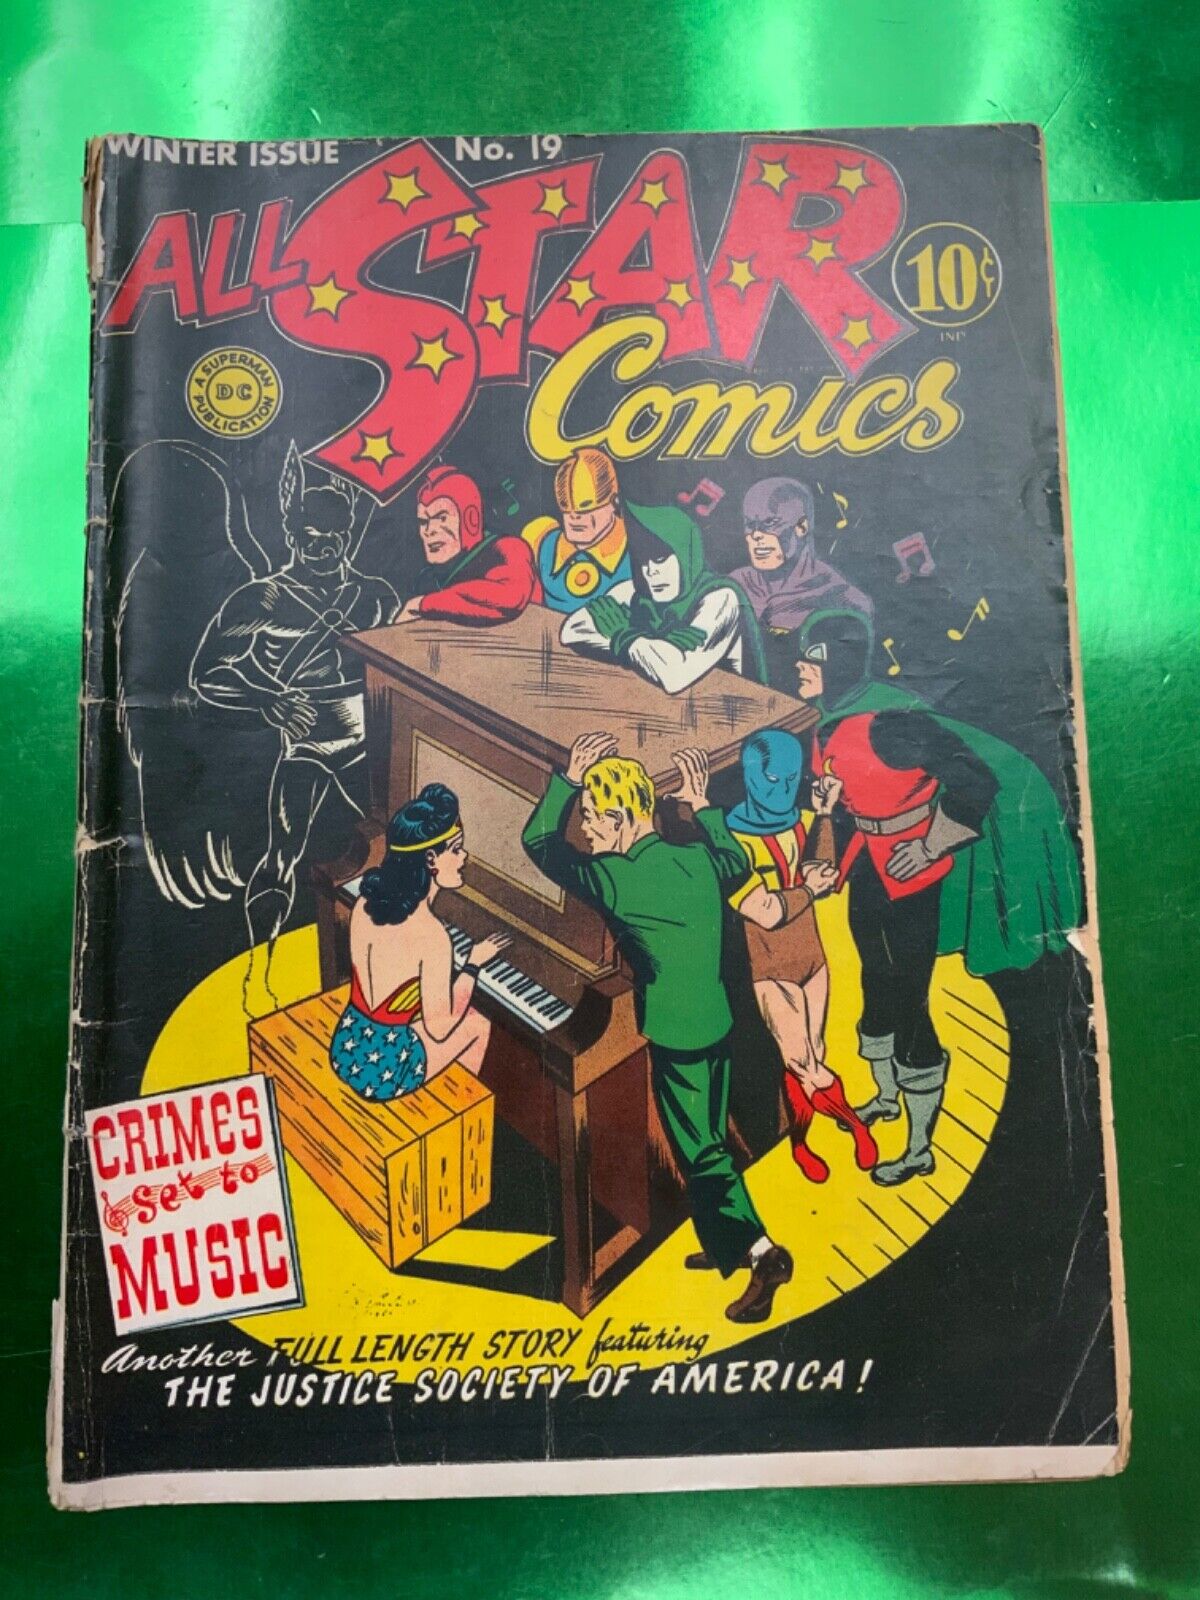 ALL STAR Comics #19 Justice Society of America 1944 NATIONAL